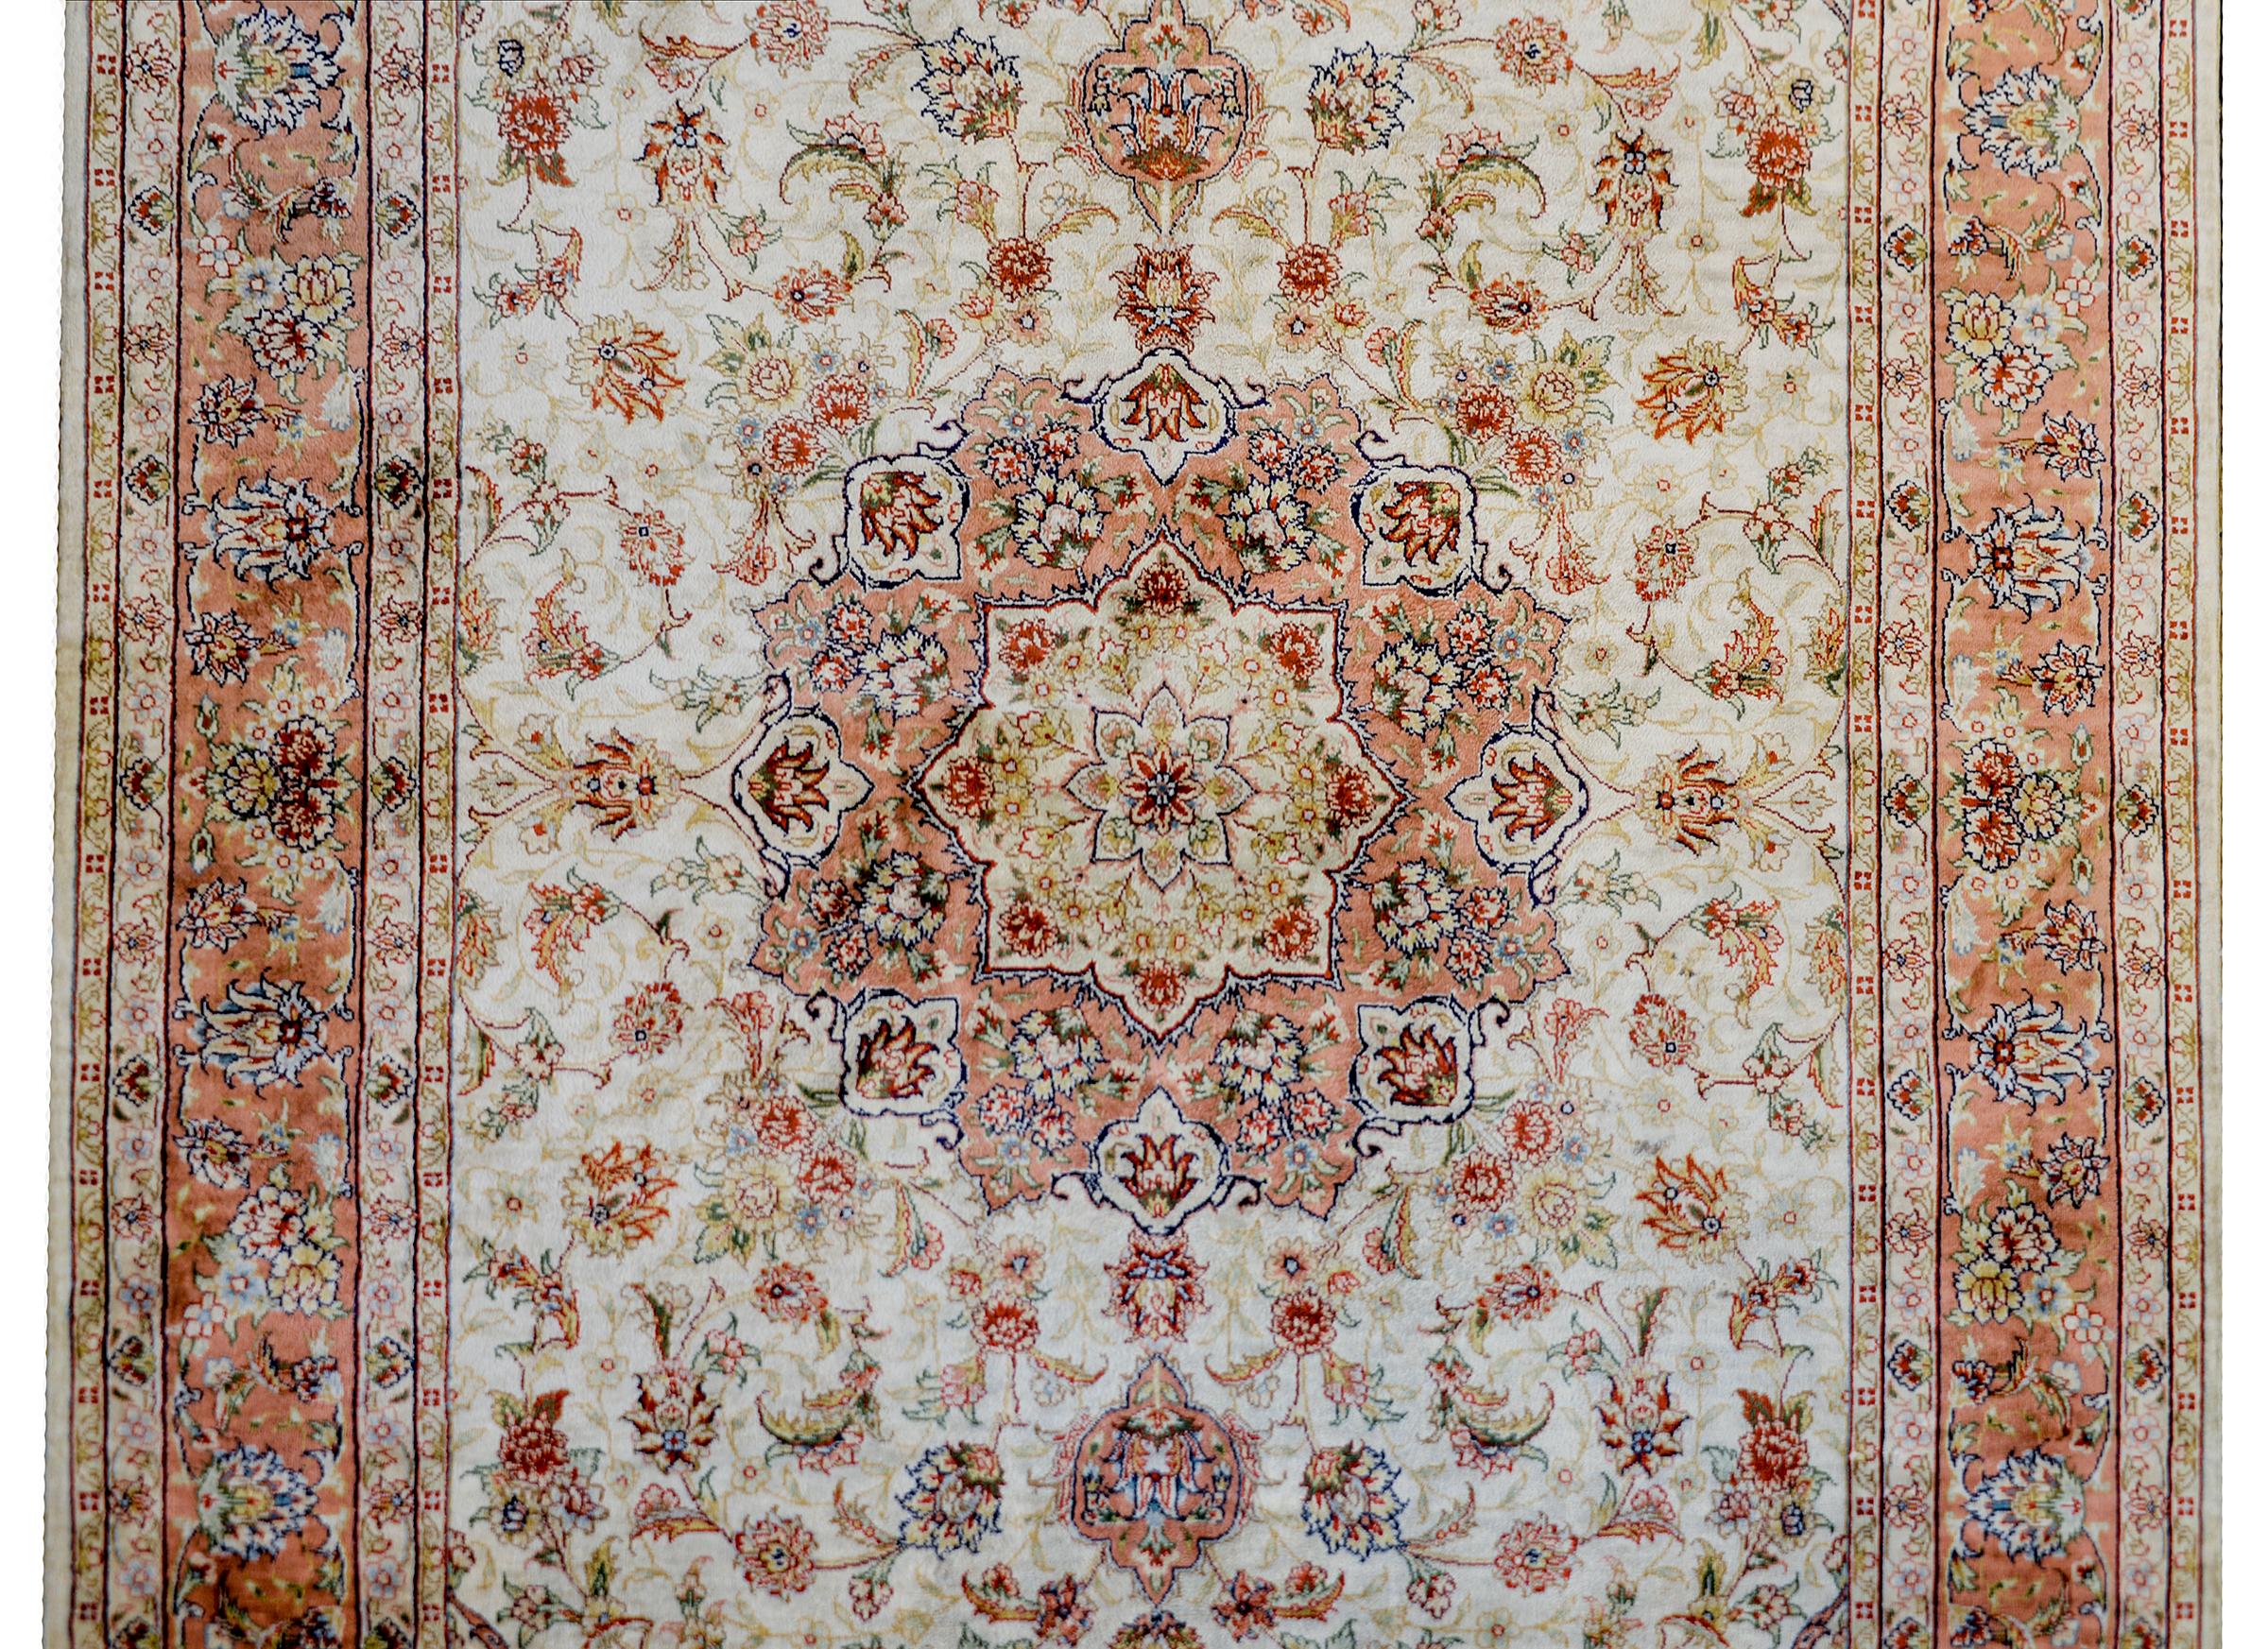 An incredible vintage Egyptian Tabriz patterned woven in100% silk with a beautiful central multi-lobed floral medallion woven in pink gold, indigo, crimson, and natural colored silk. The medallion lives amidst a field of myriad flowers with